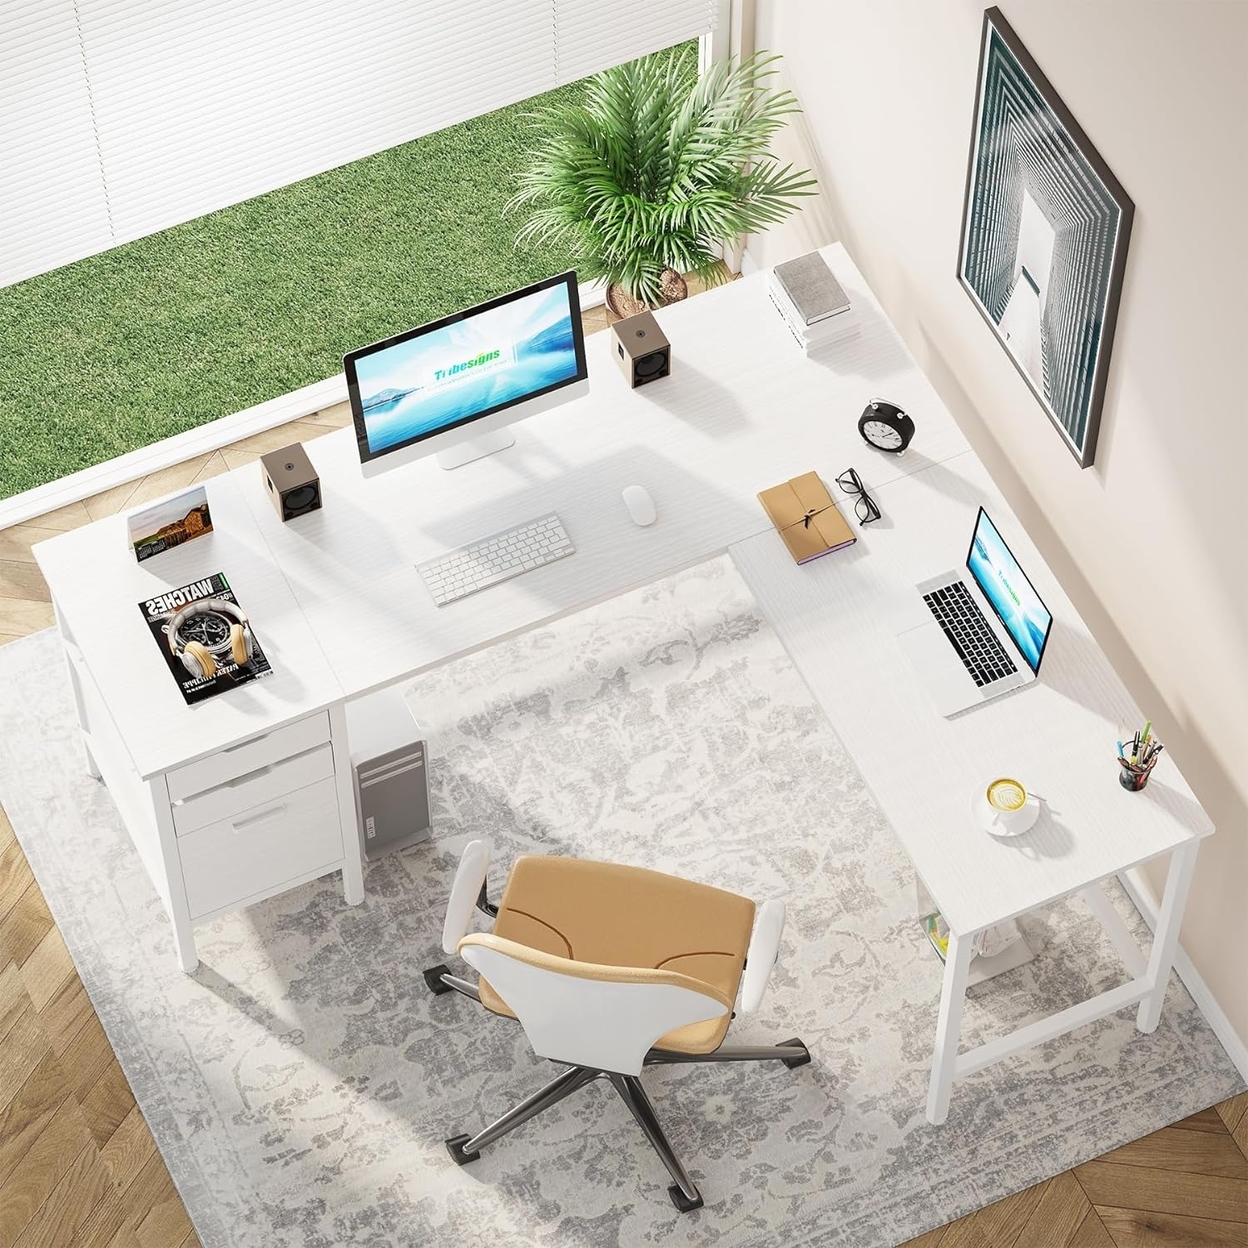 Tribesigns L Shaped Desk With File Drawer Cabinet, 59 Corner Desk L Shaped Computer Desk With Drawers - White